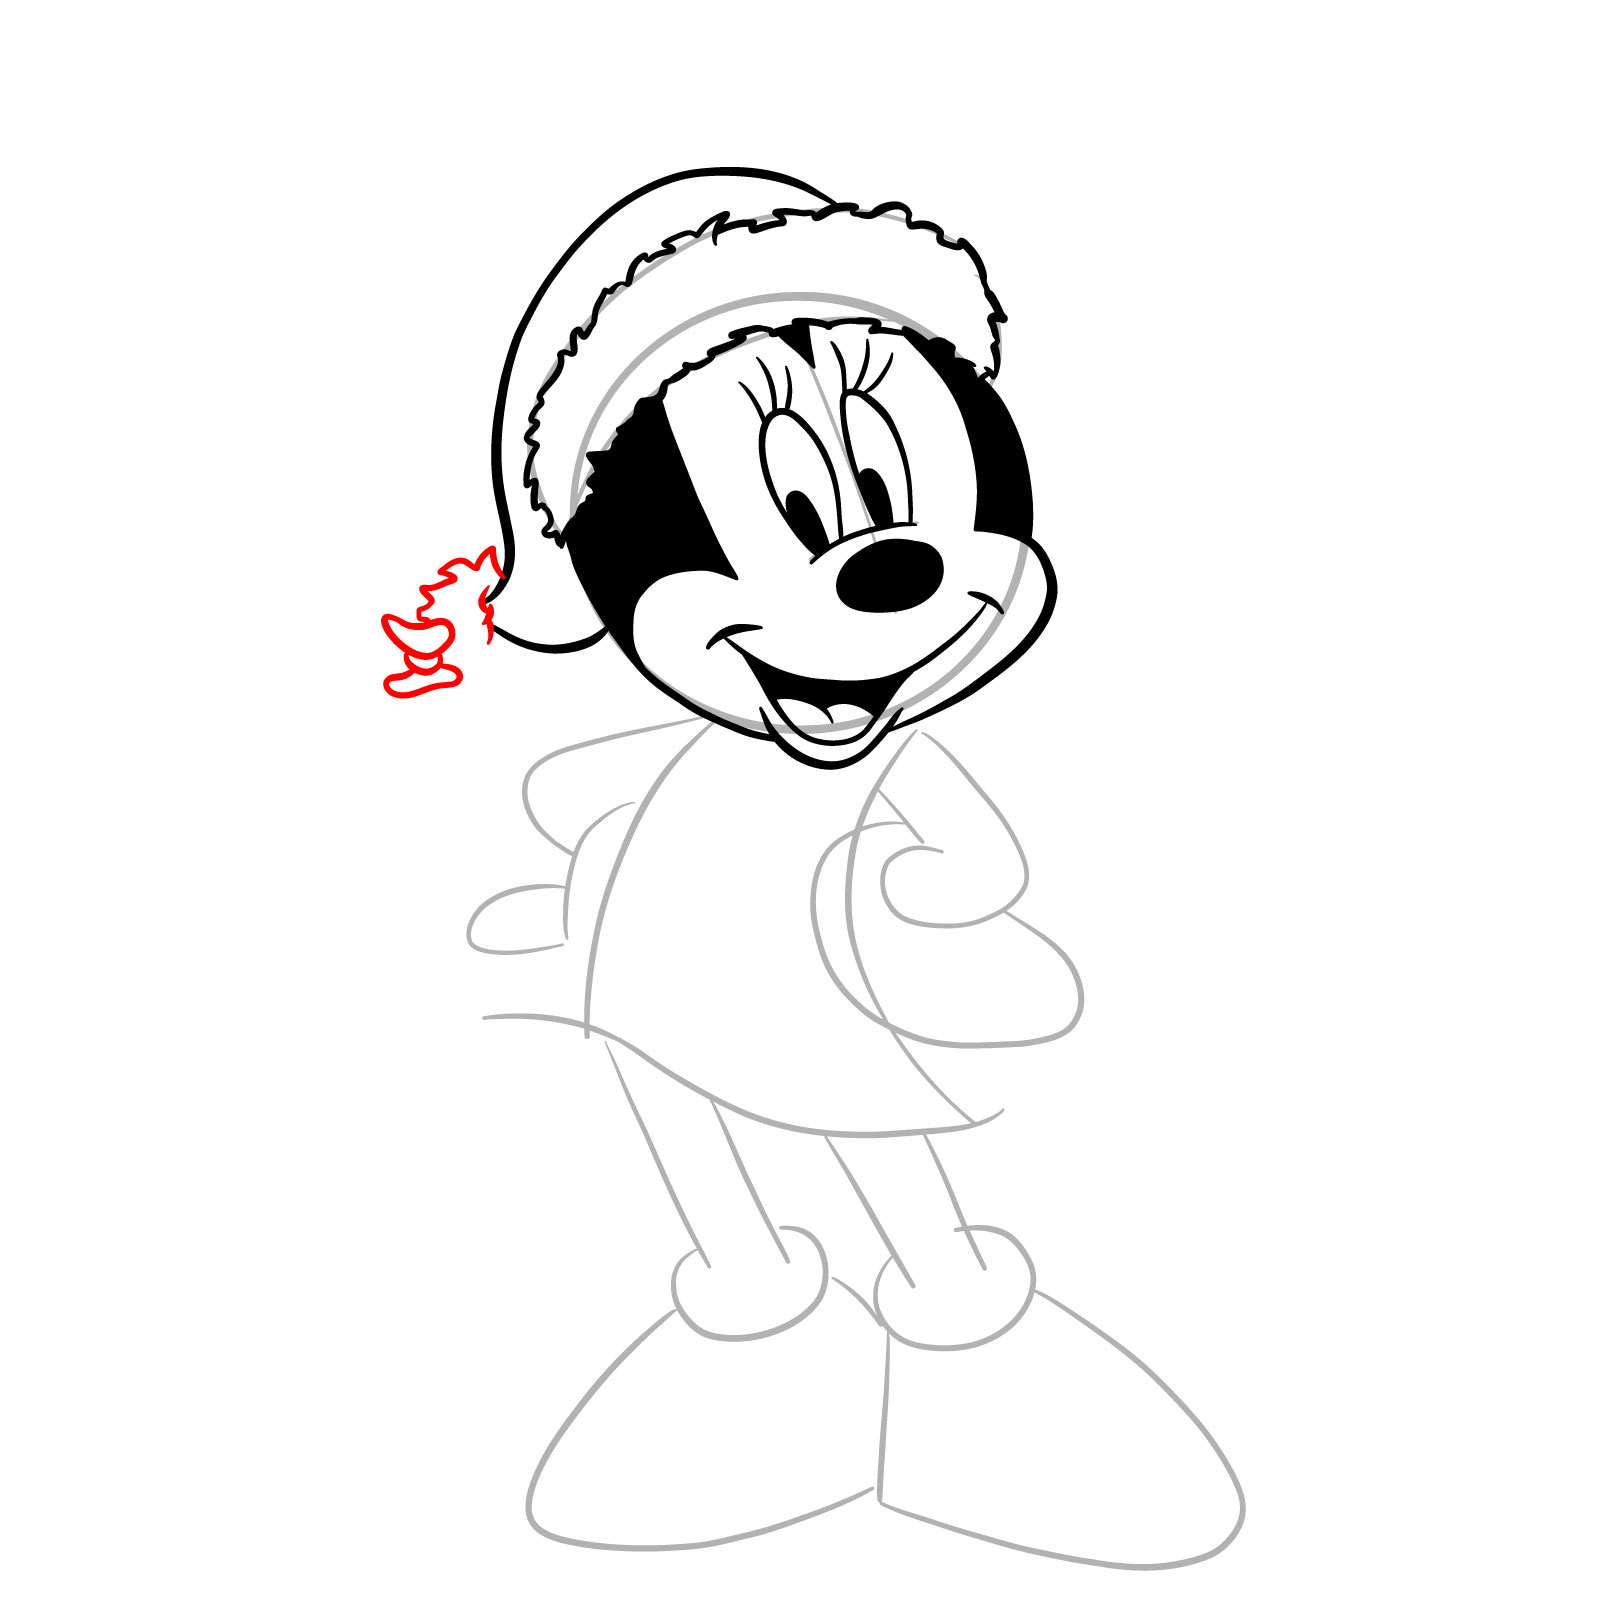 How to draw Minnie in a Christmas dress - step 15